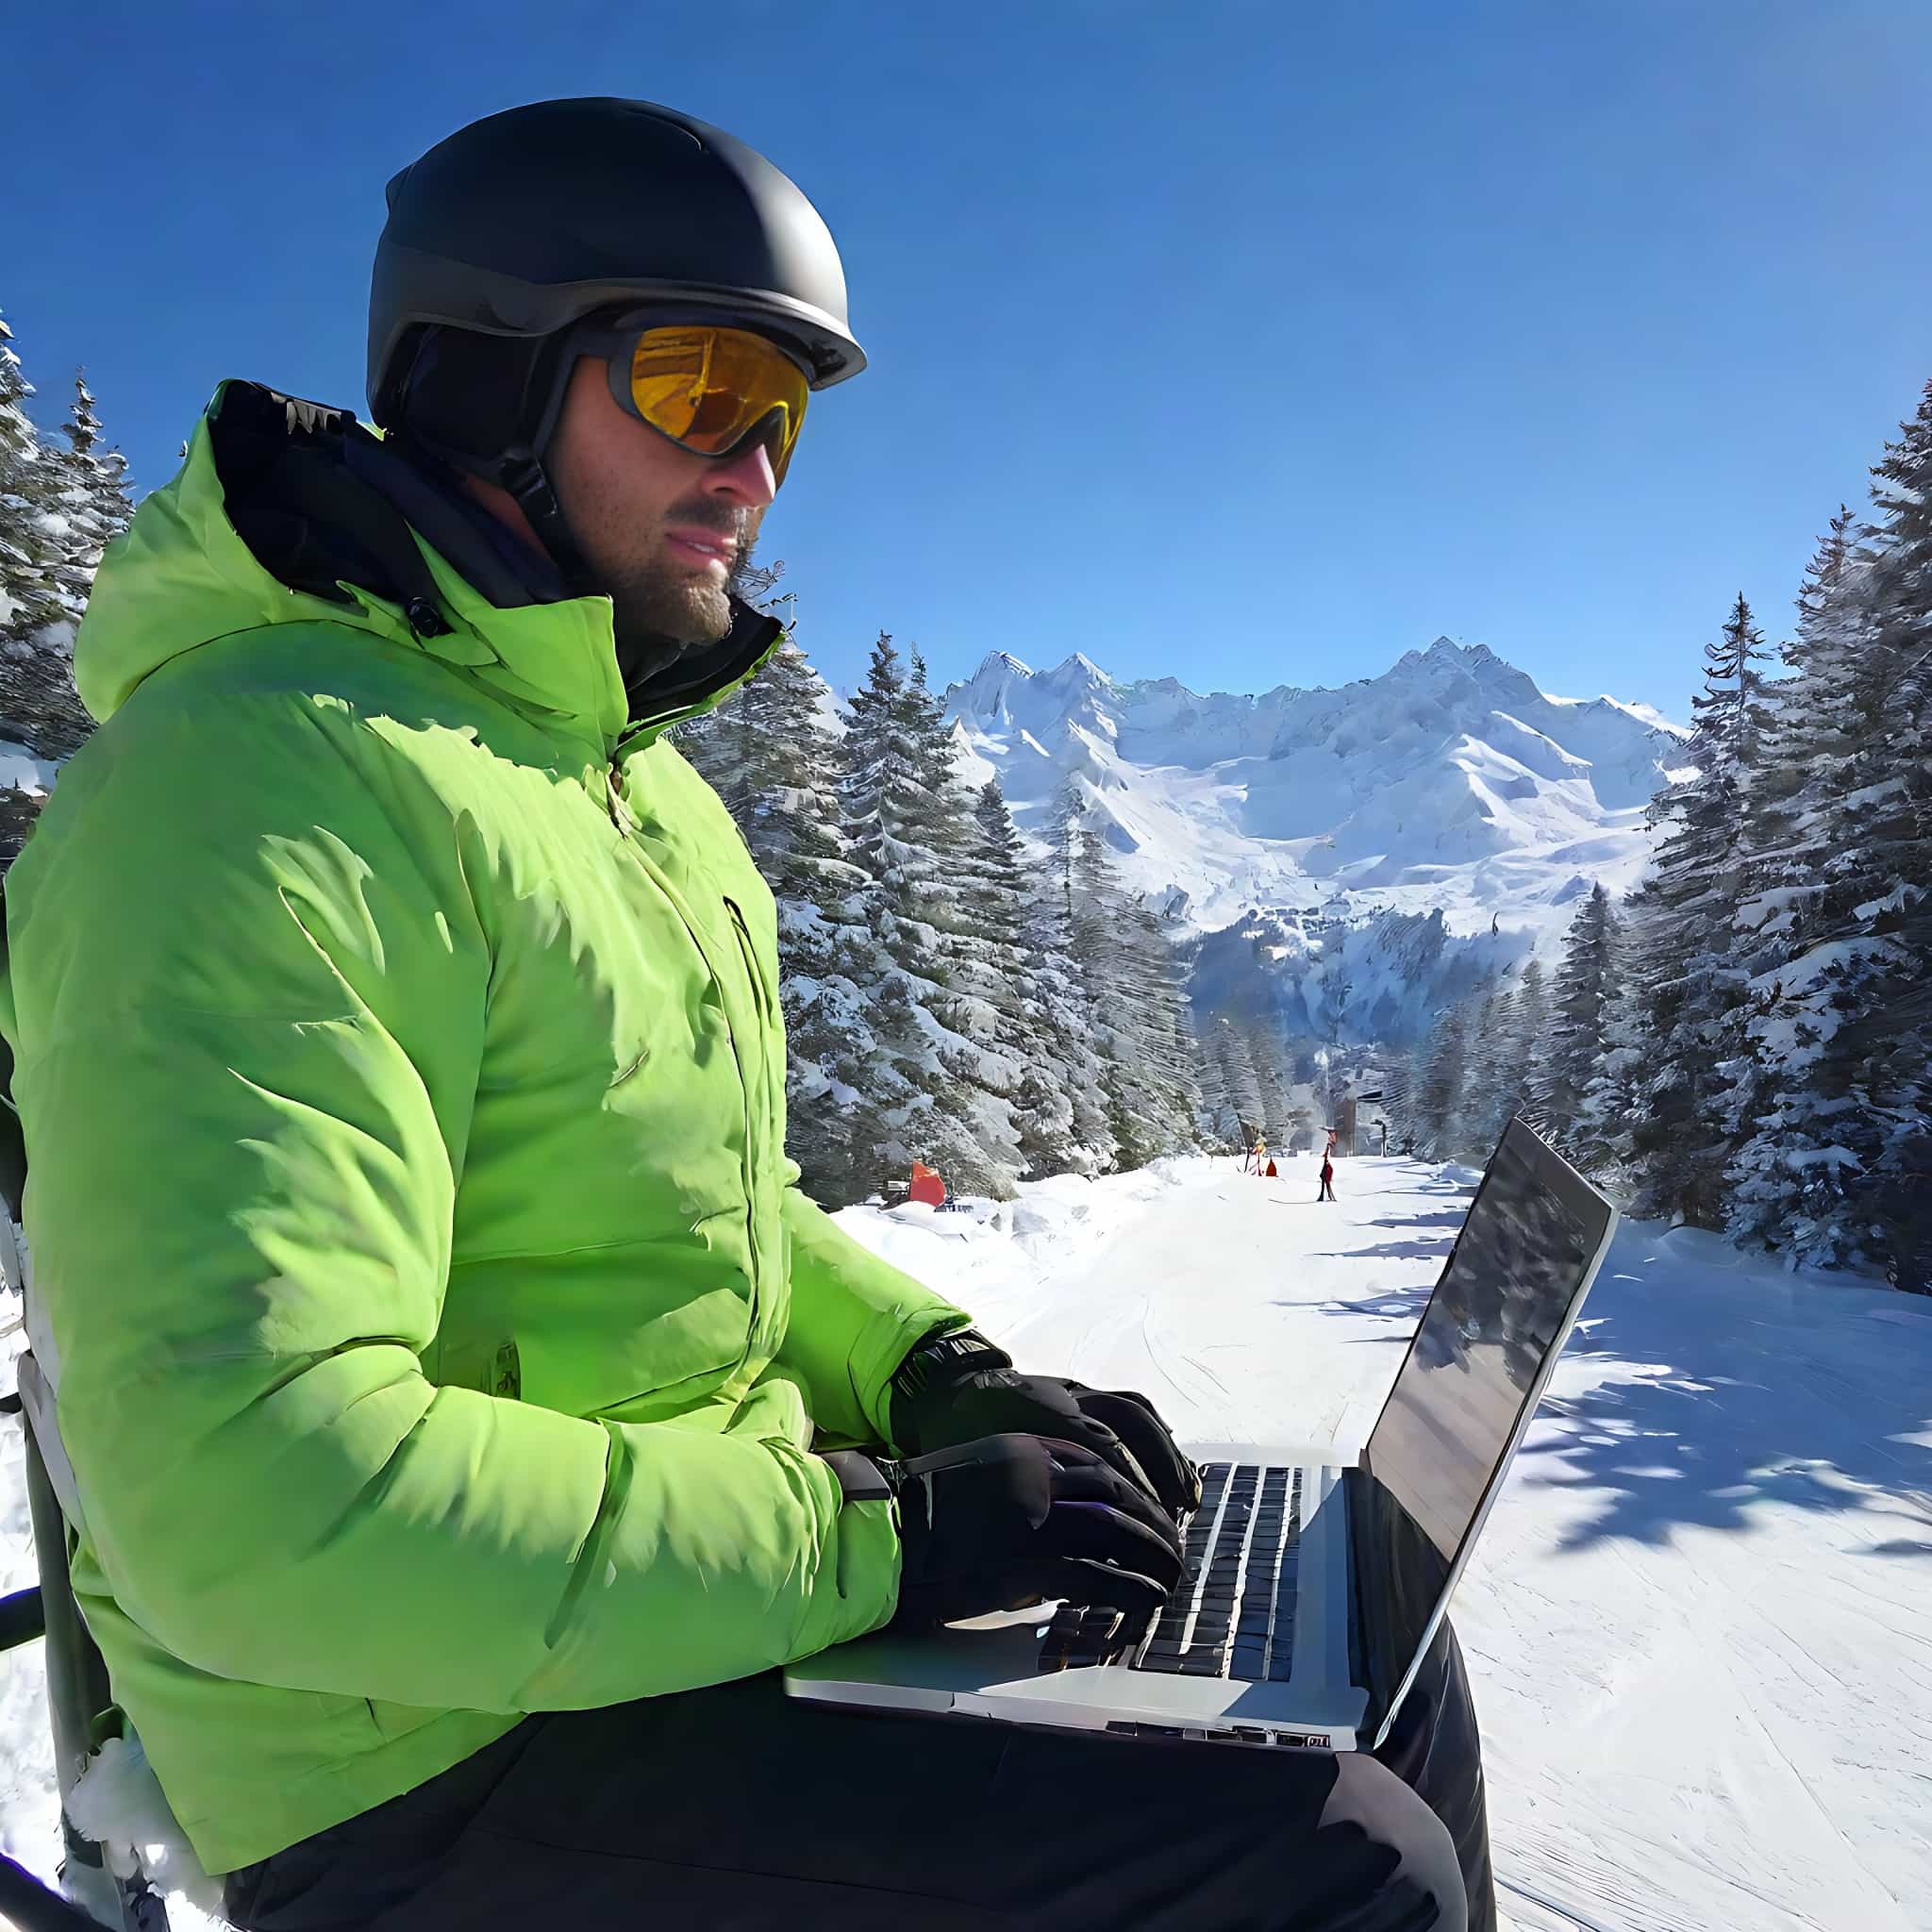 worker using laptop while on a ski chairlift